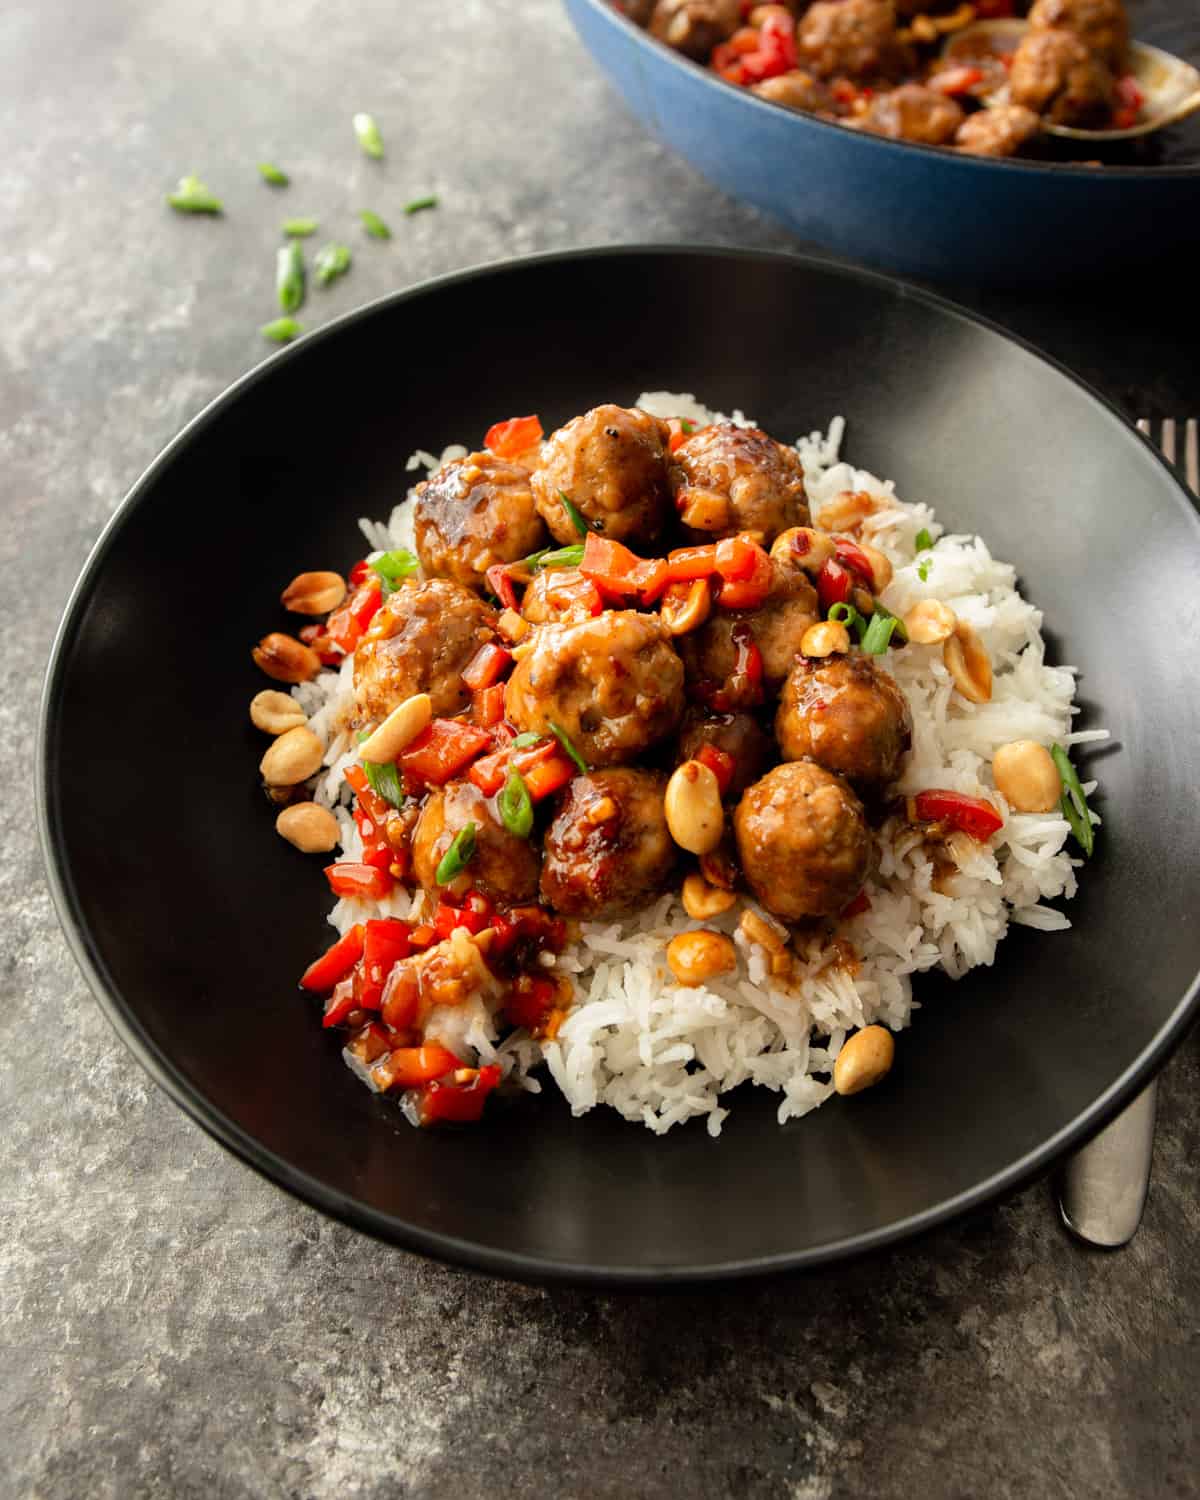 meatballs over rice in a black bowl